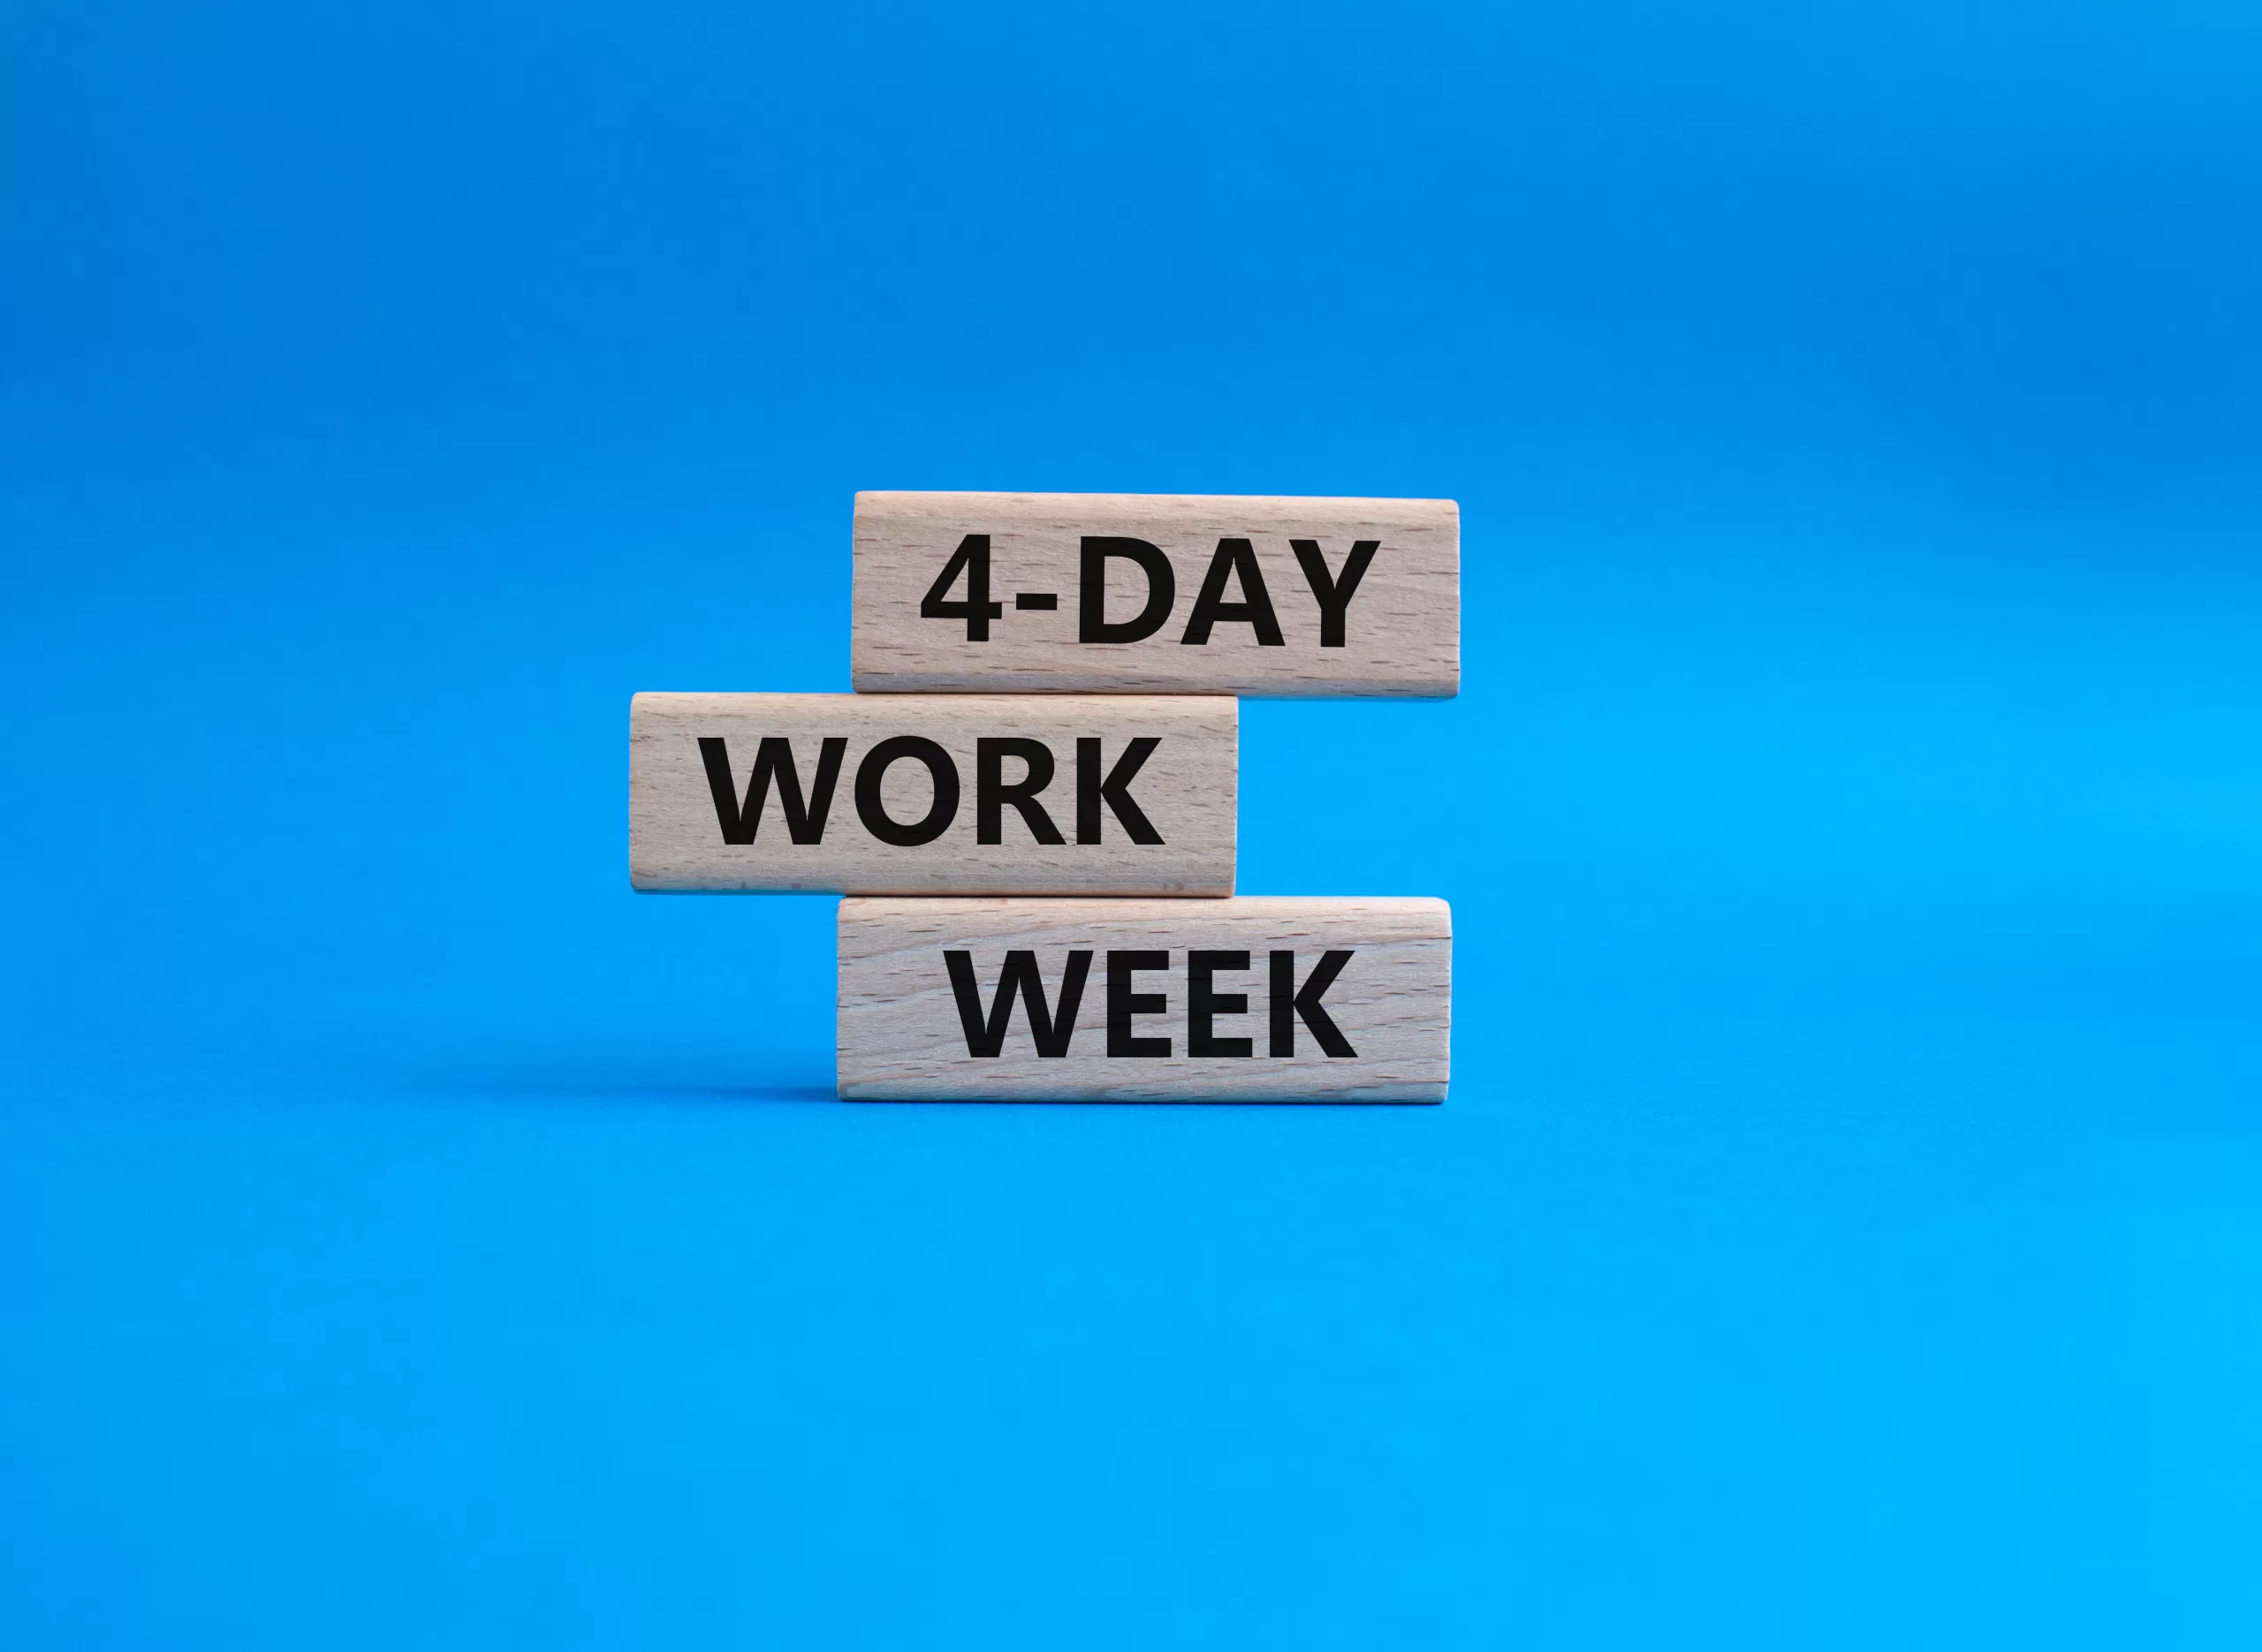 The Essential Guide to a 4-Day Workweek: Insights, Results, and Considerations from Wonderlic’s Experience